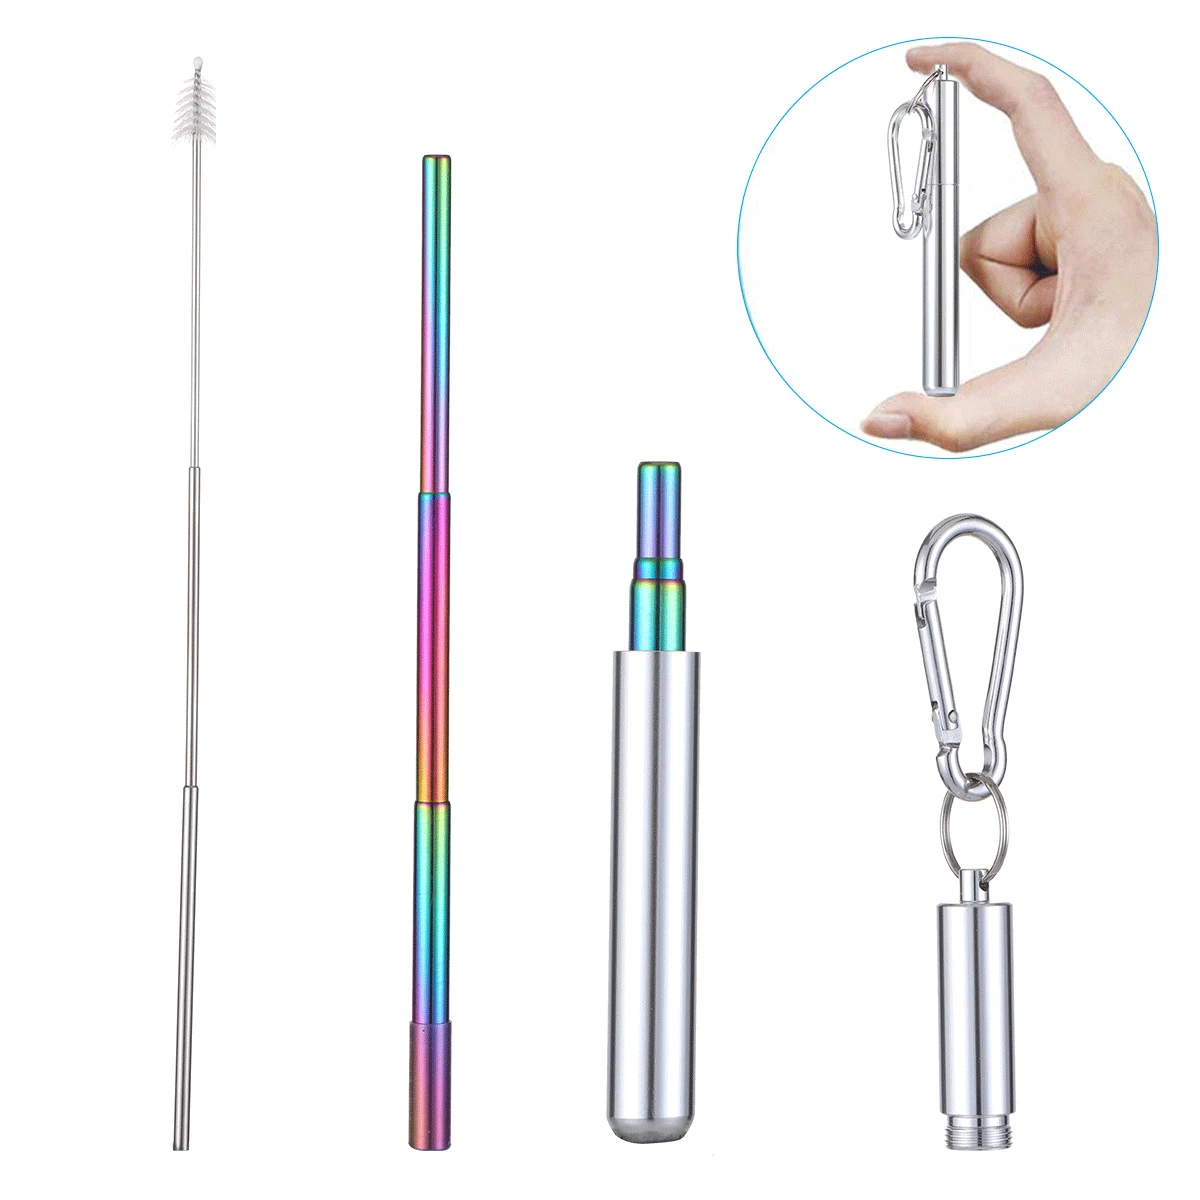 

Portable Stainless Steel Telescopic Drinking Straw Collapsible Reusable Metal Drinking Straws With Case And Brush